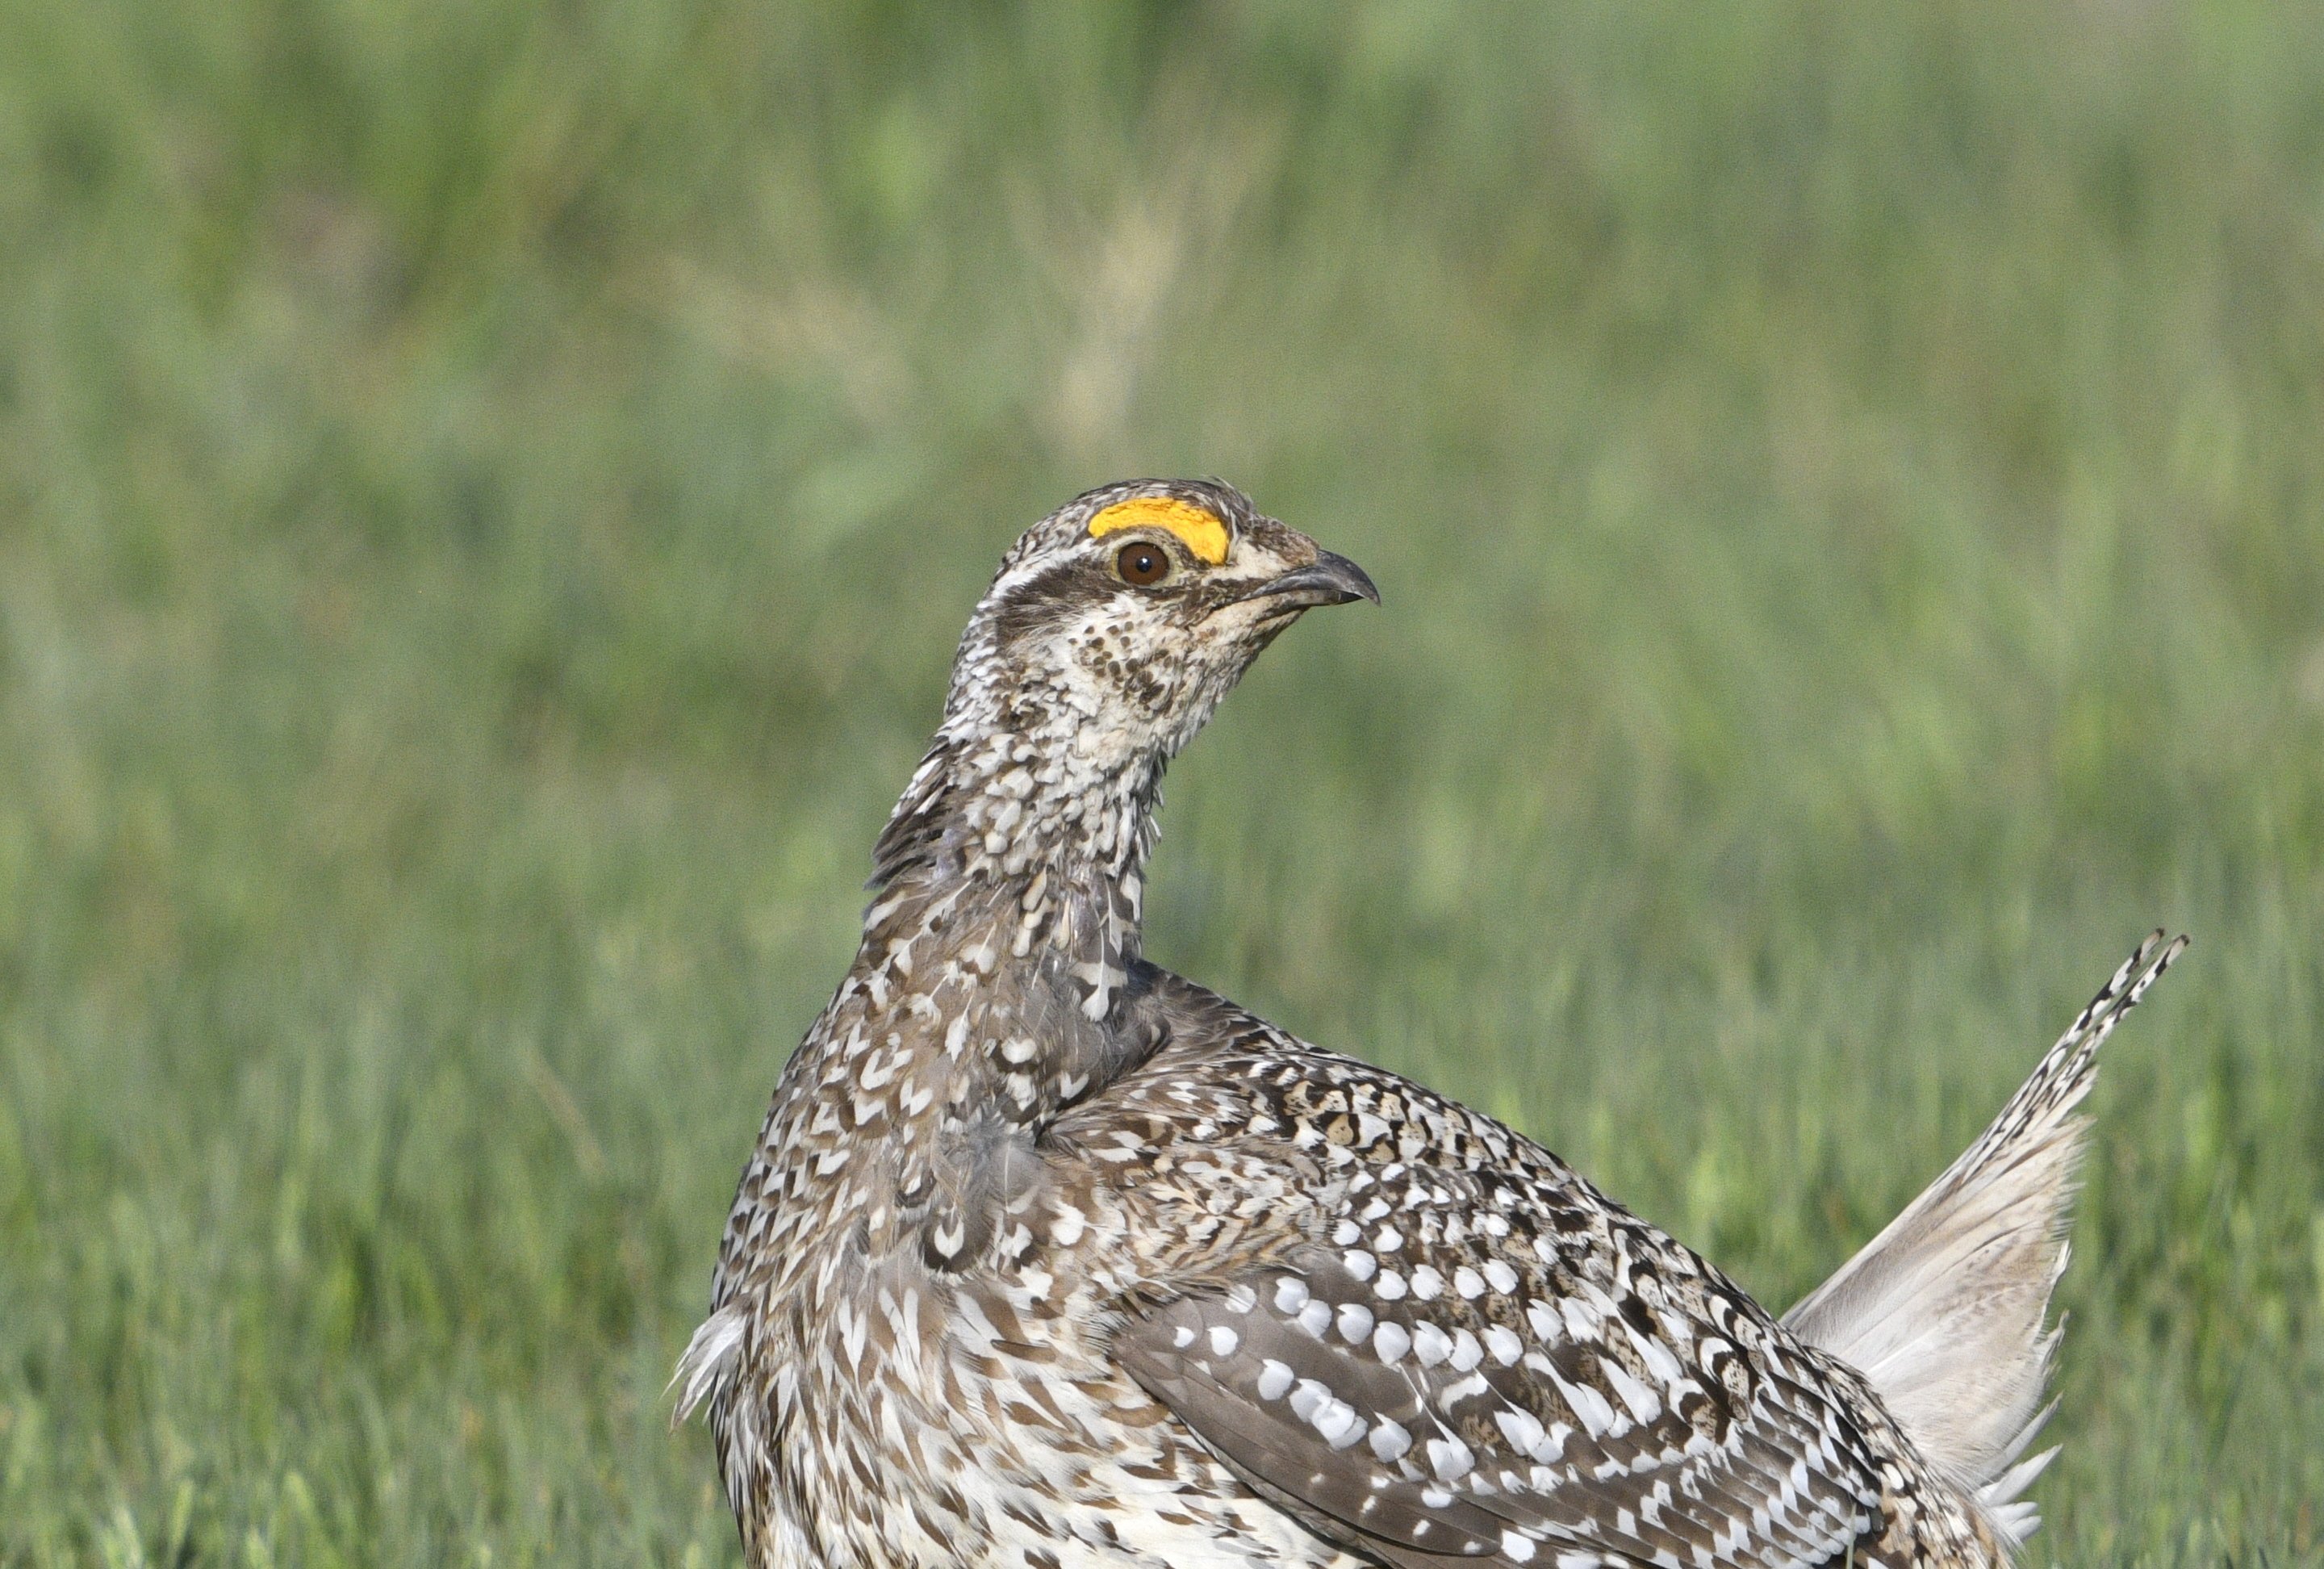 Sharptailed Grouse